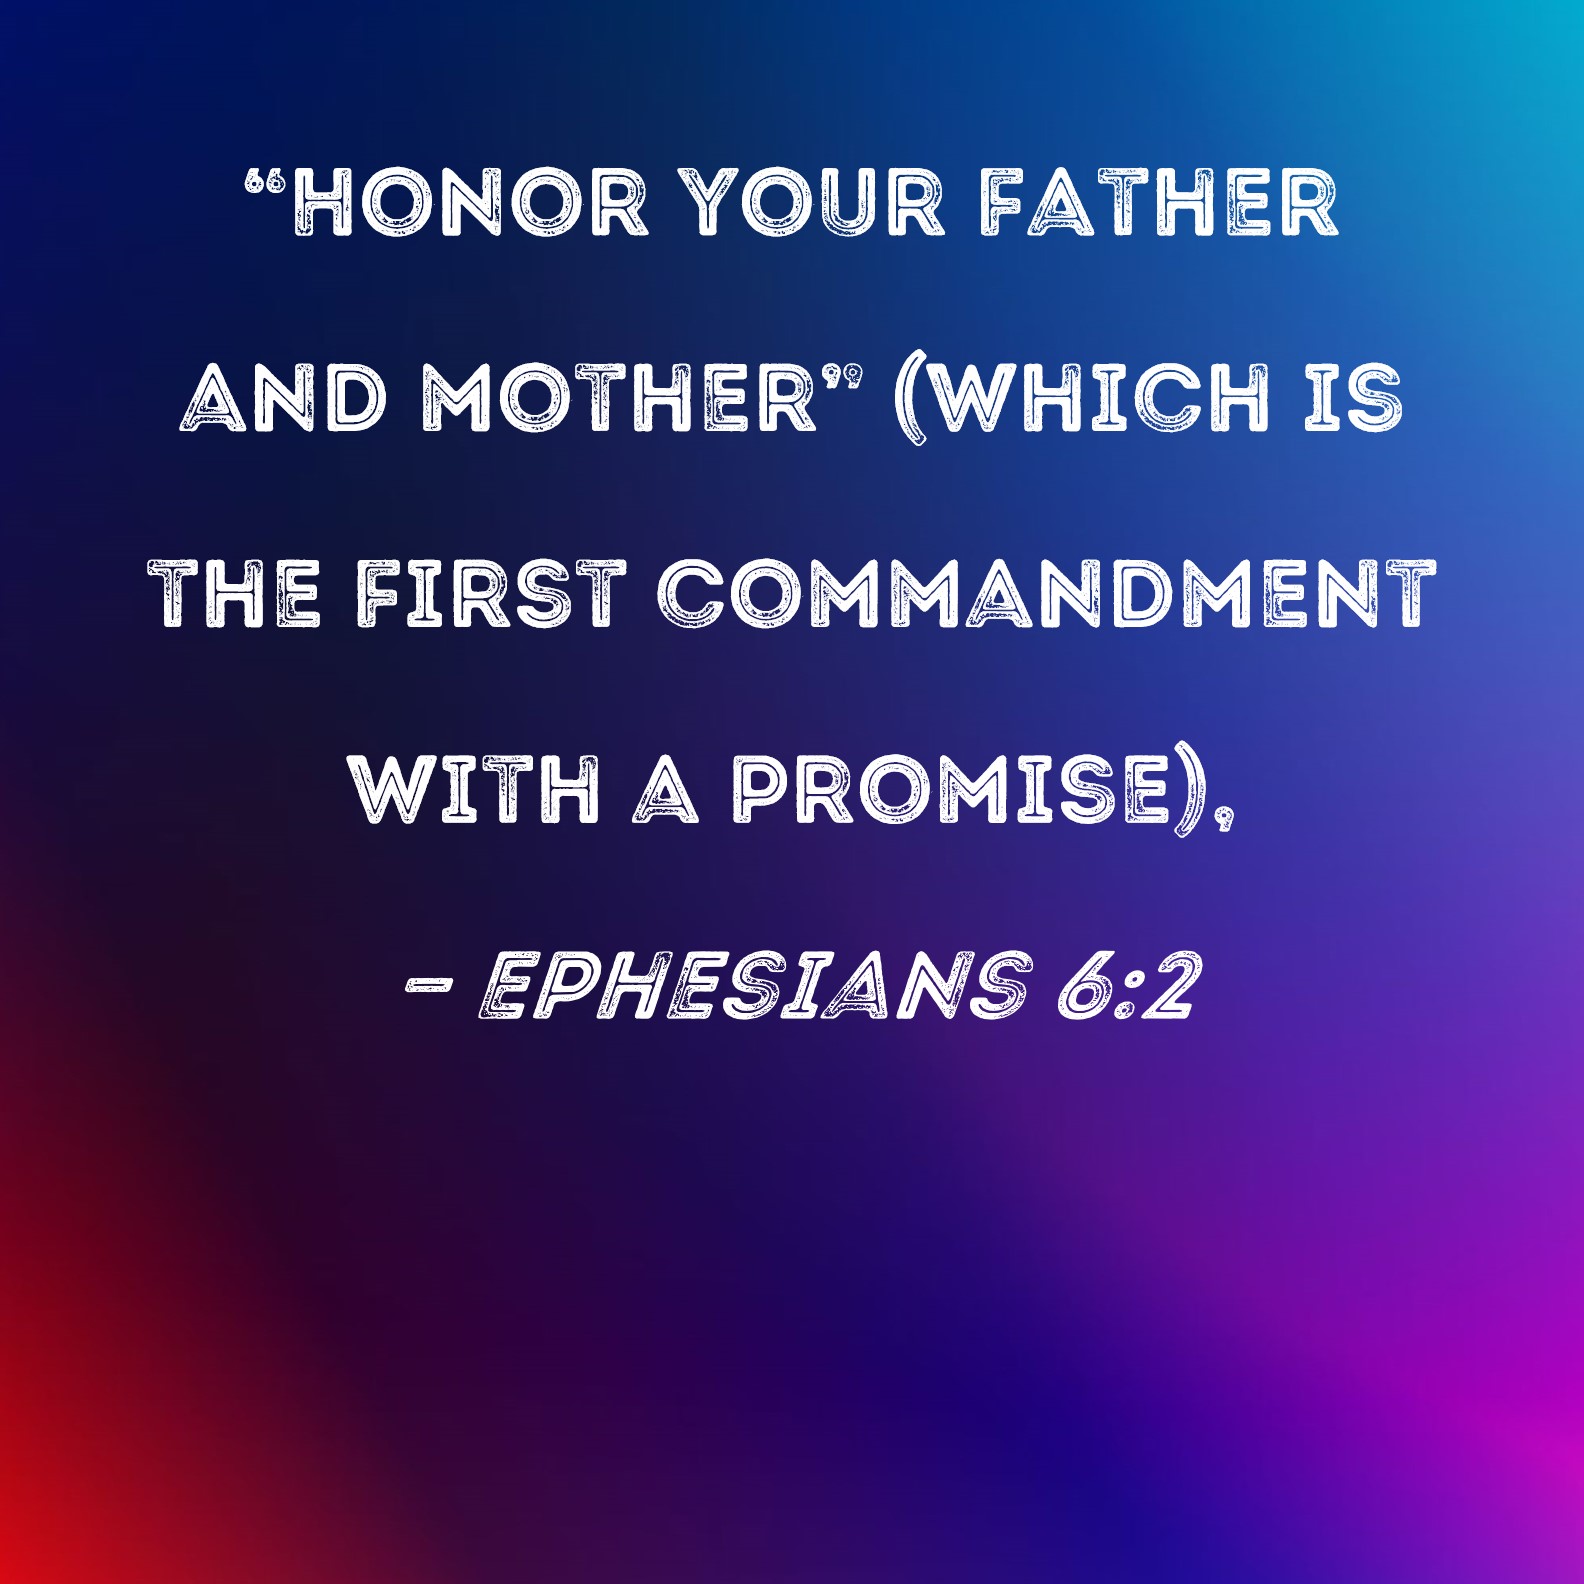 honor your father and mother essay